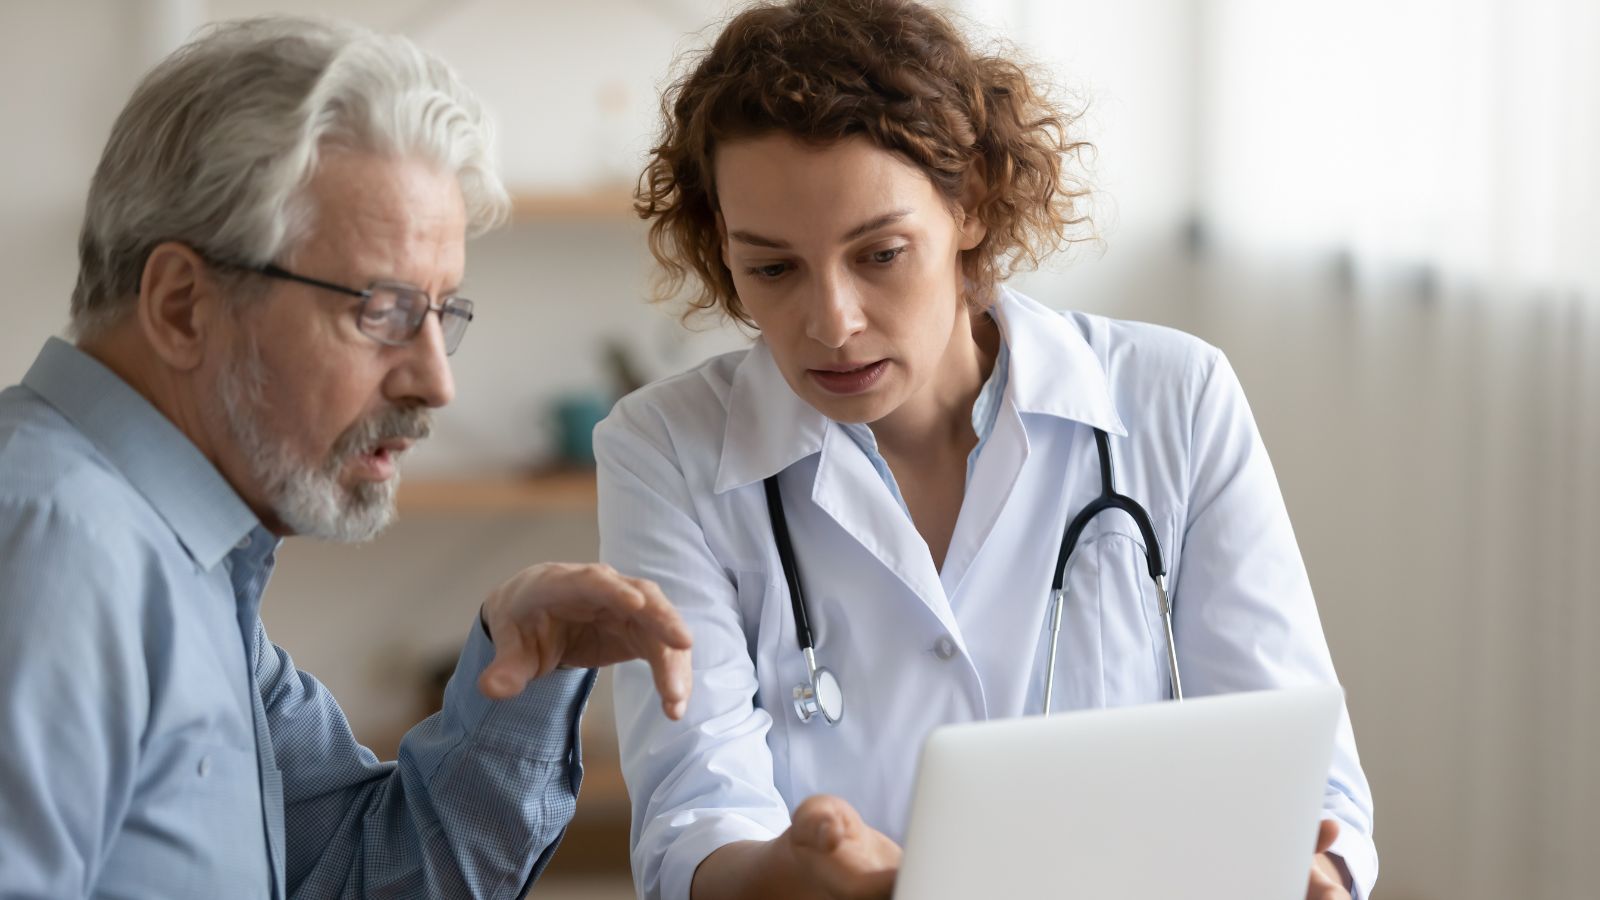 <p>Regular health check-ups are important for monitoring your health and getting the preventative care you might need. Baby Boomers frequently access the health check-ups that they are entitled to. We should follow in their footsteps and be proactive about our health and check-ups.</p>